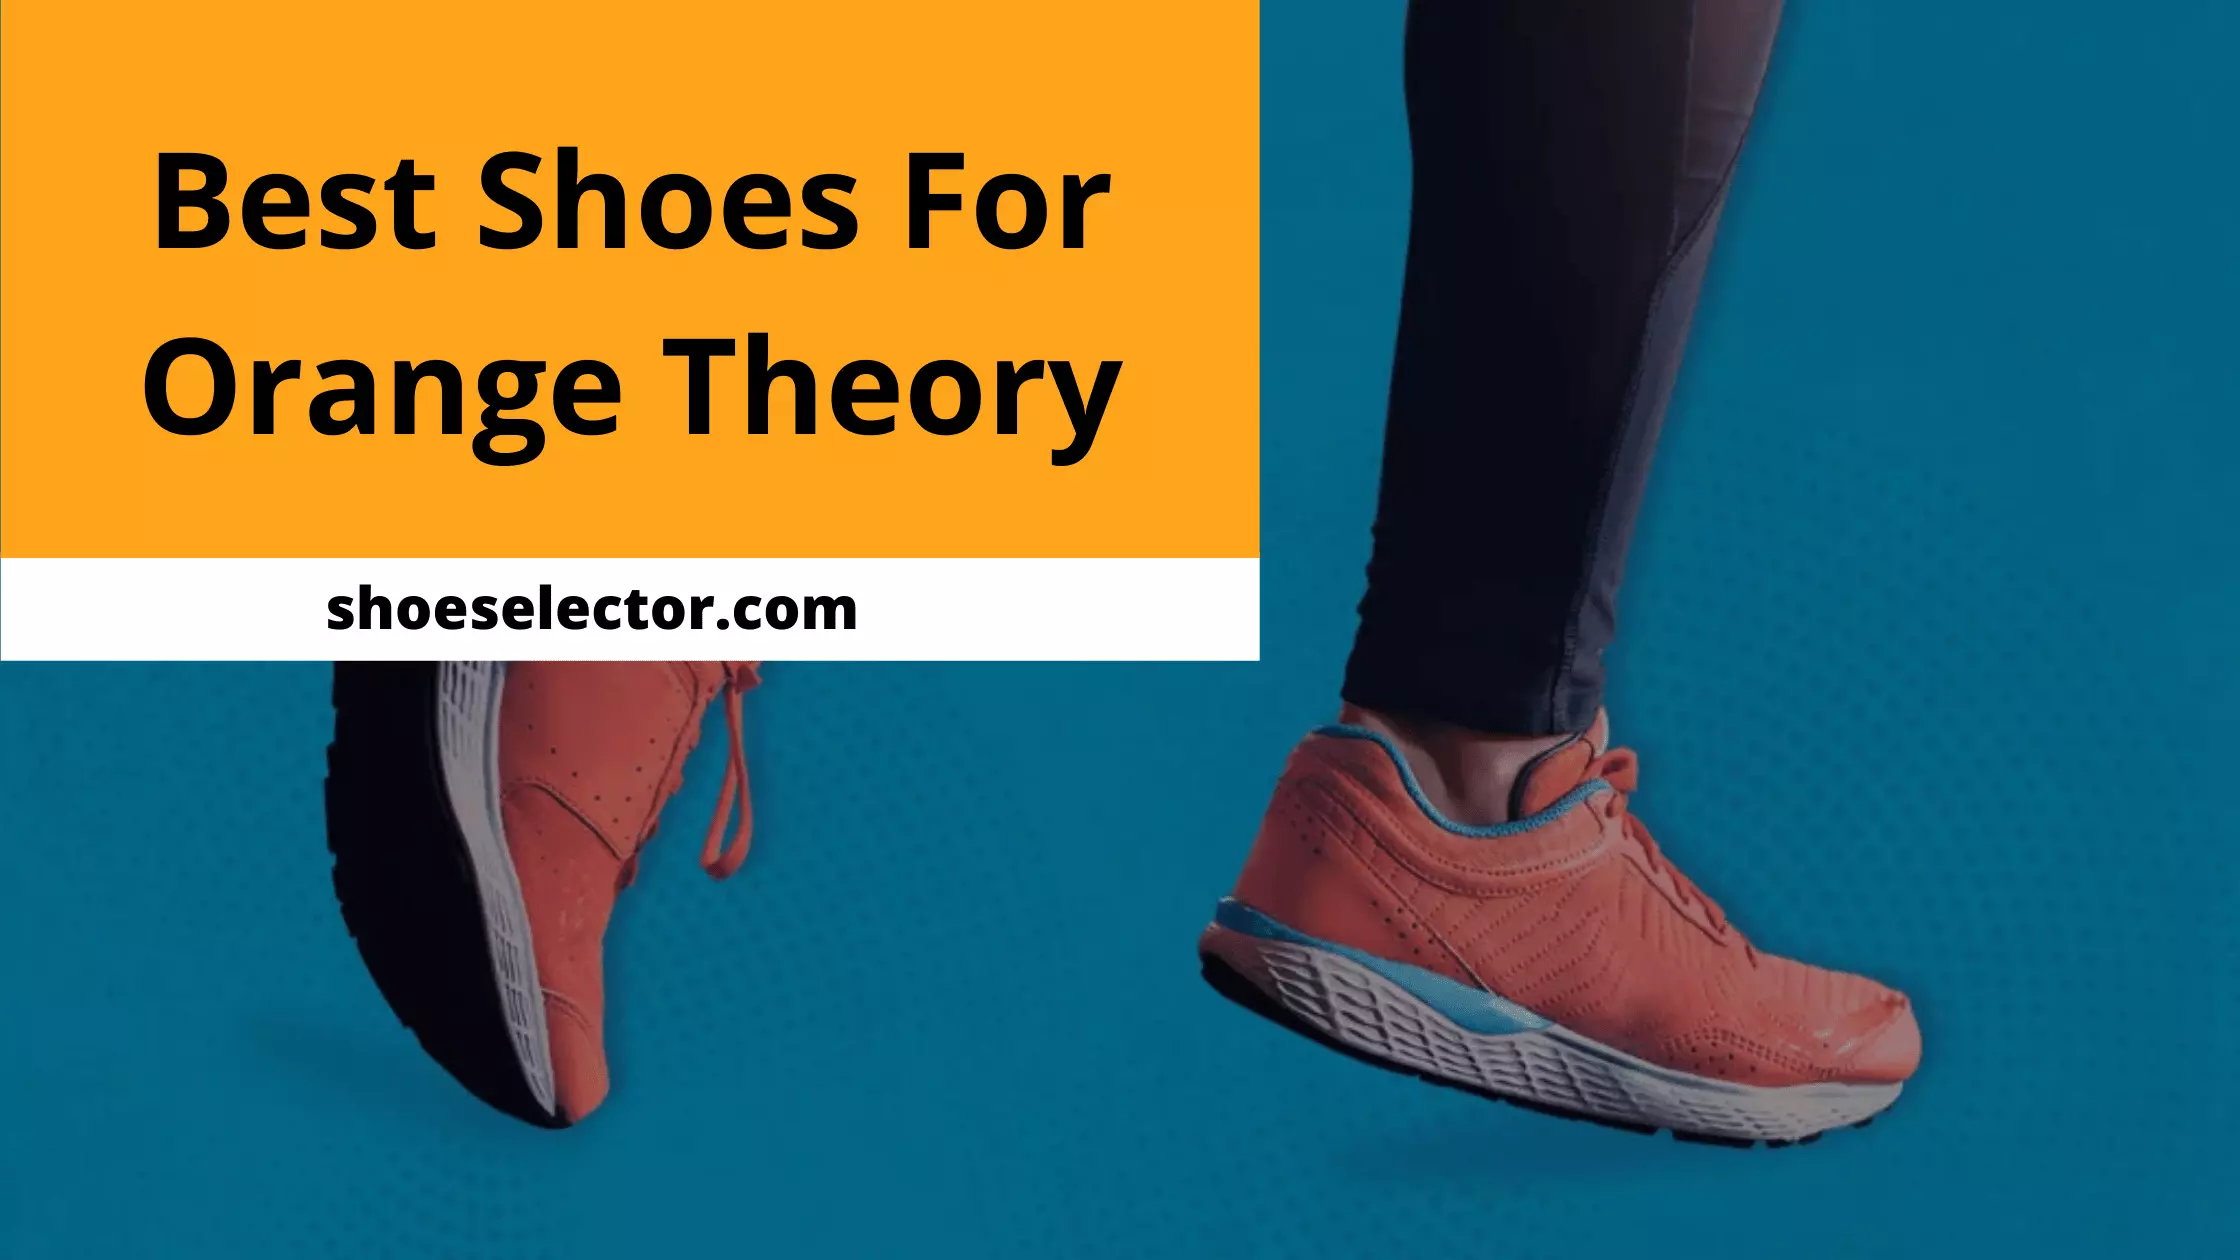 Best Shoes For Orange Theory - Recommended Guide